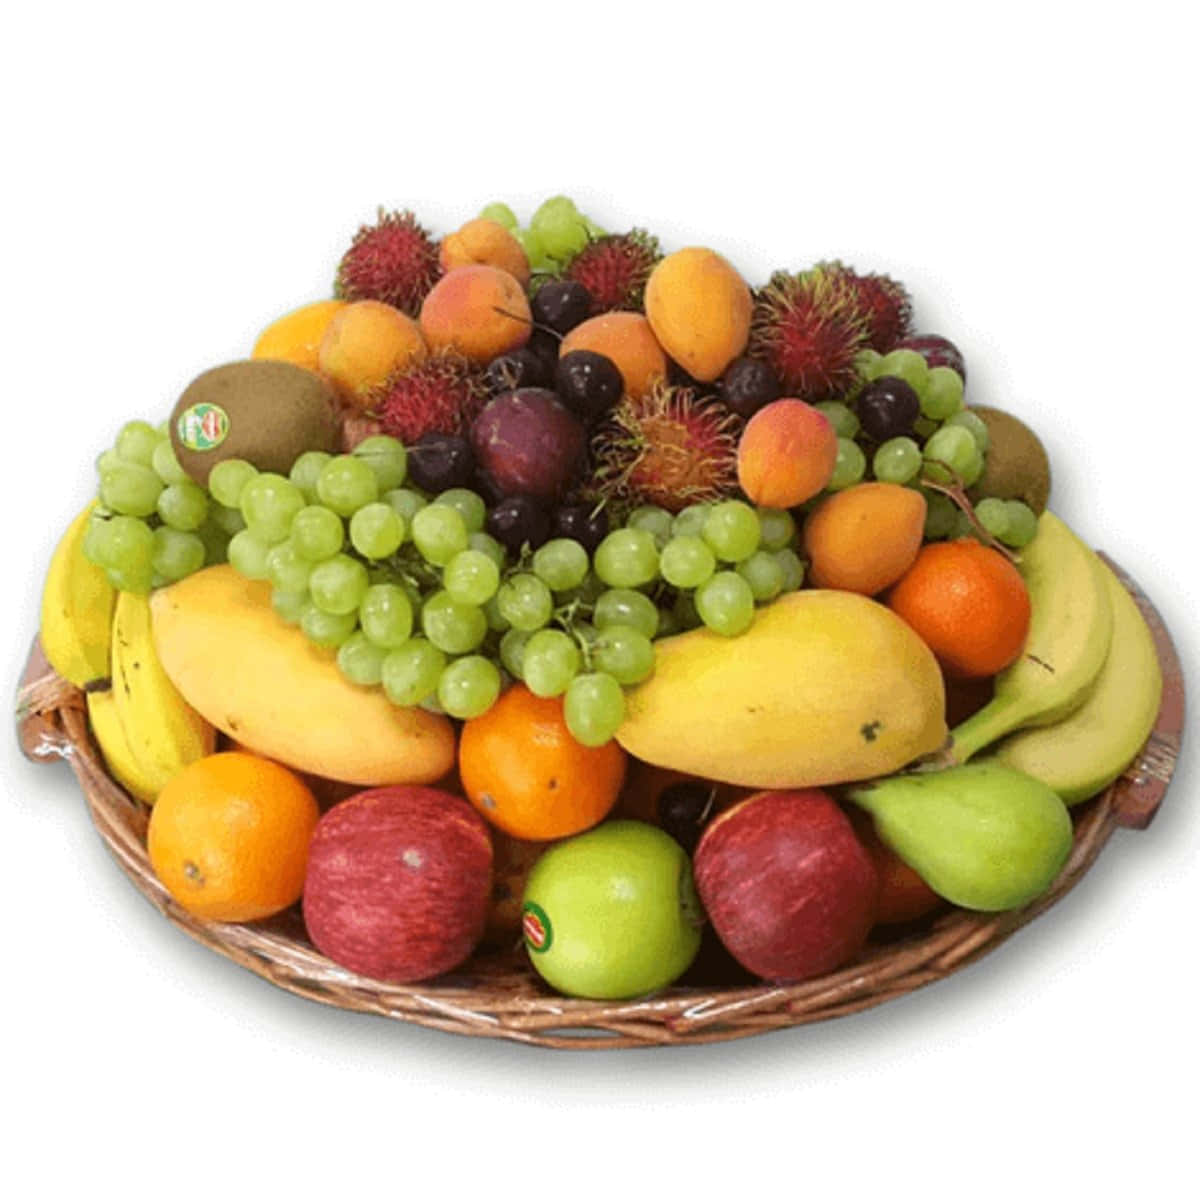 Friends come in all shapes and colors, just like the fruits in this basket.